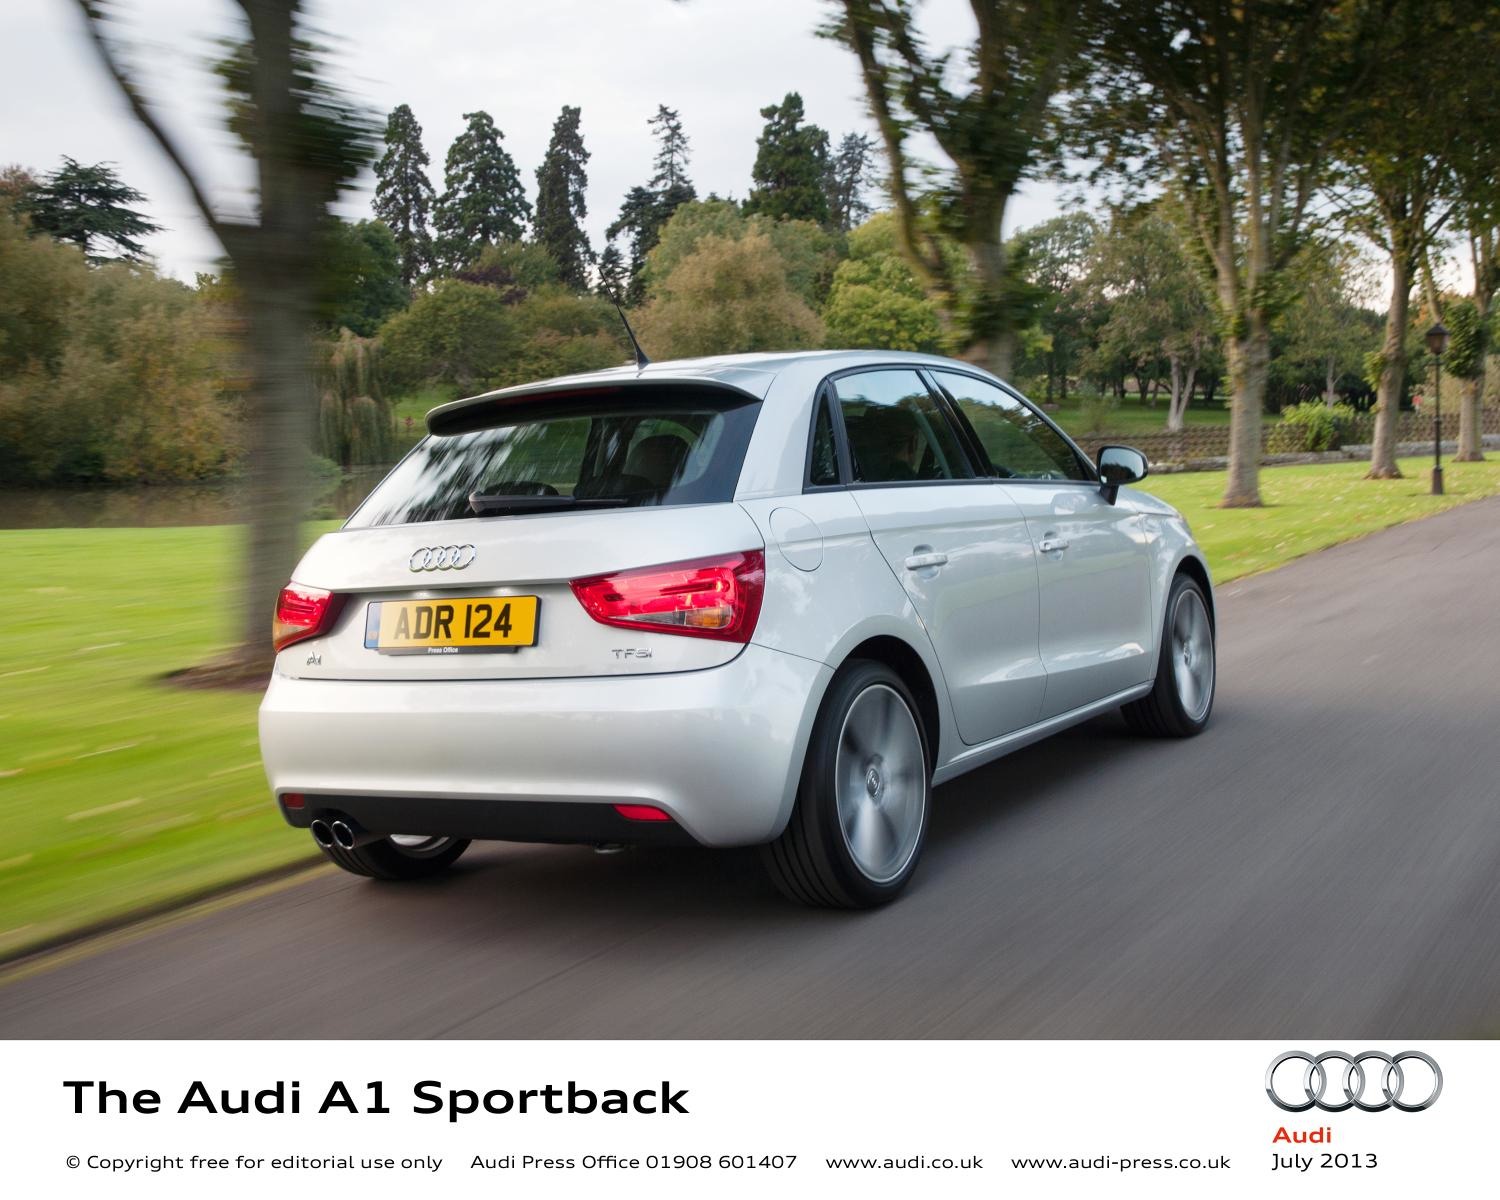 Audi A1 Sportback road test report and reviewWheel World ...